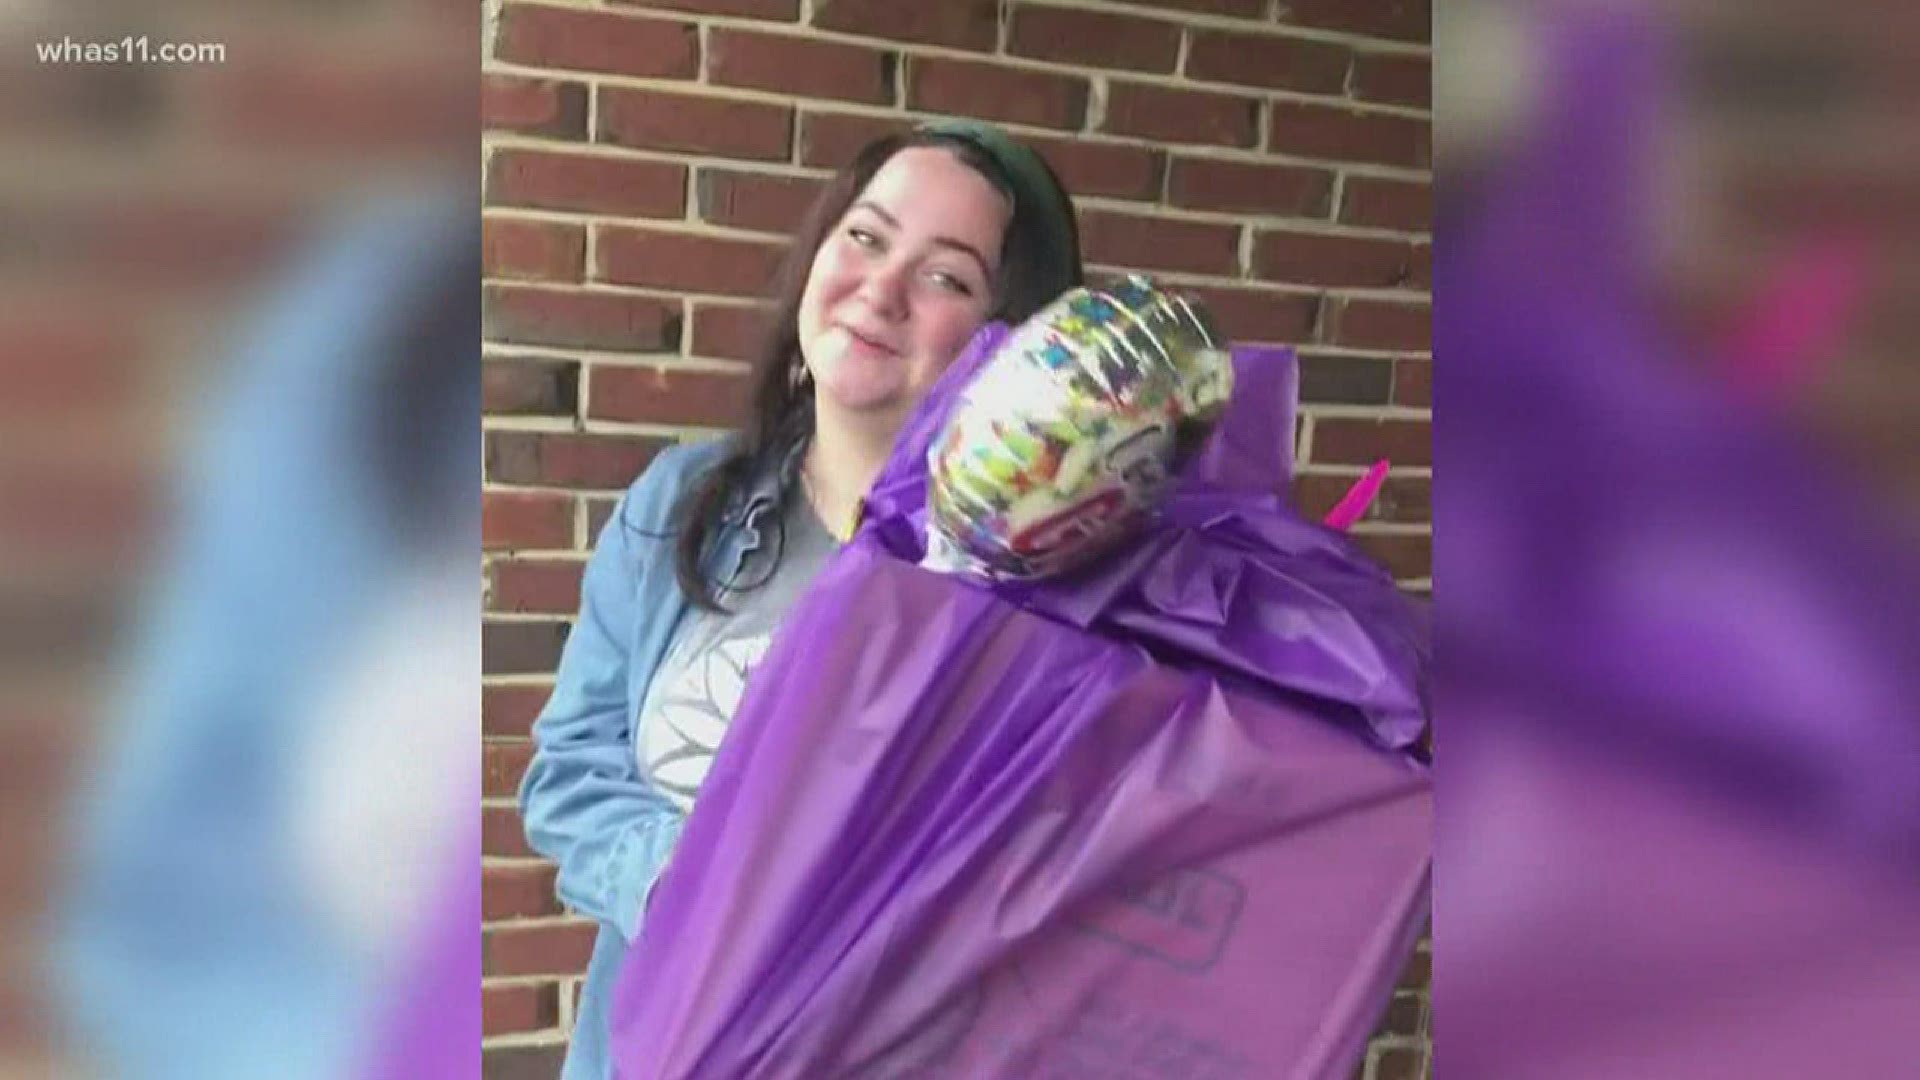 The coronavirus has halted graduation plans for many across Kentucky and Indiana. Neighbors in southern Indiana are stepping in to make sure they still feel special.